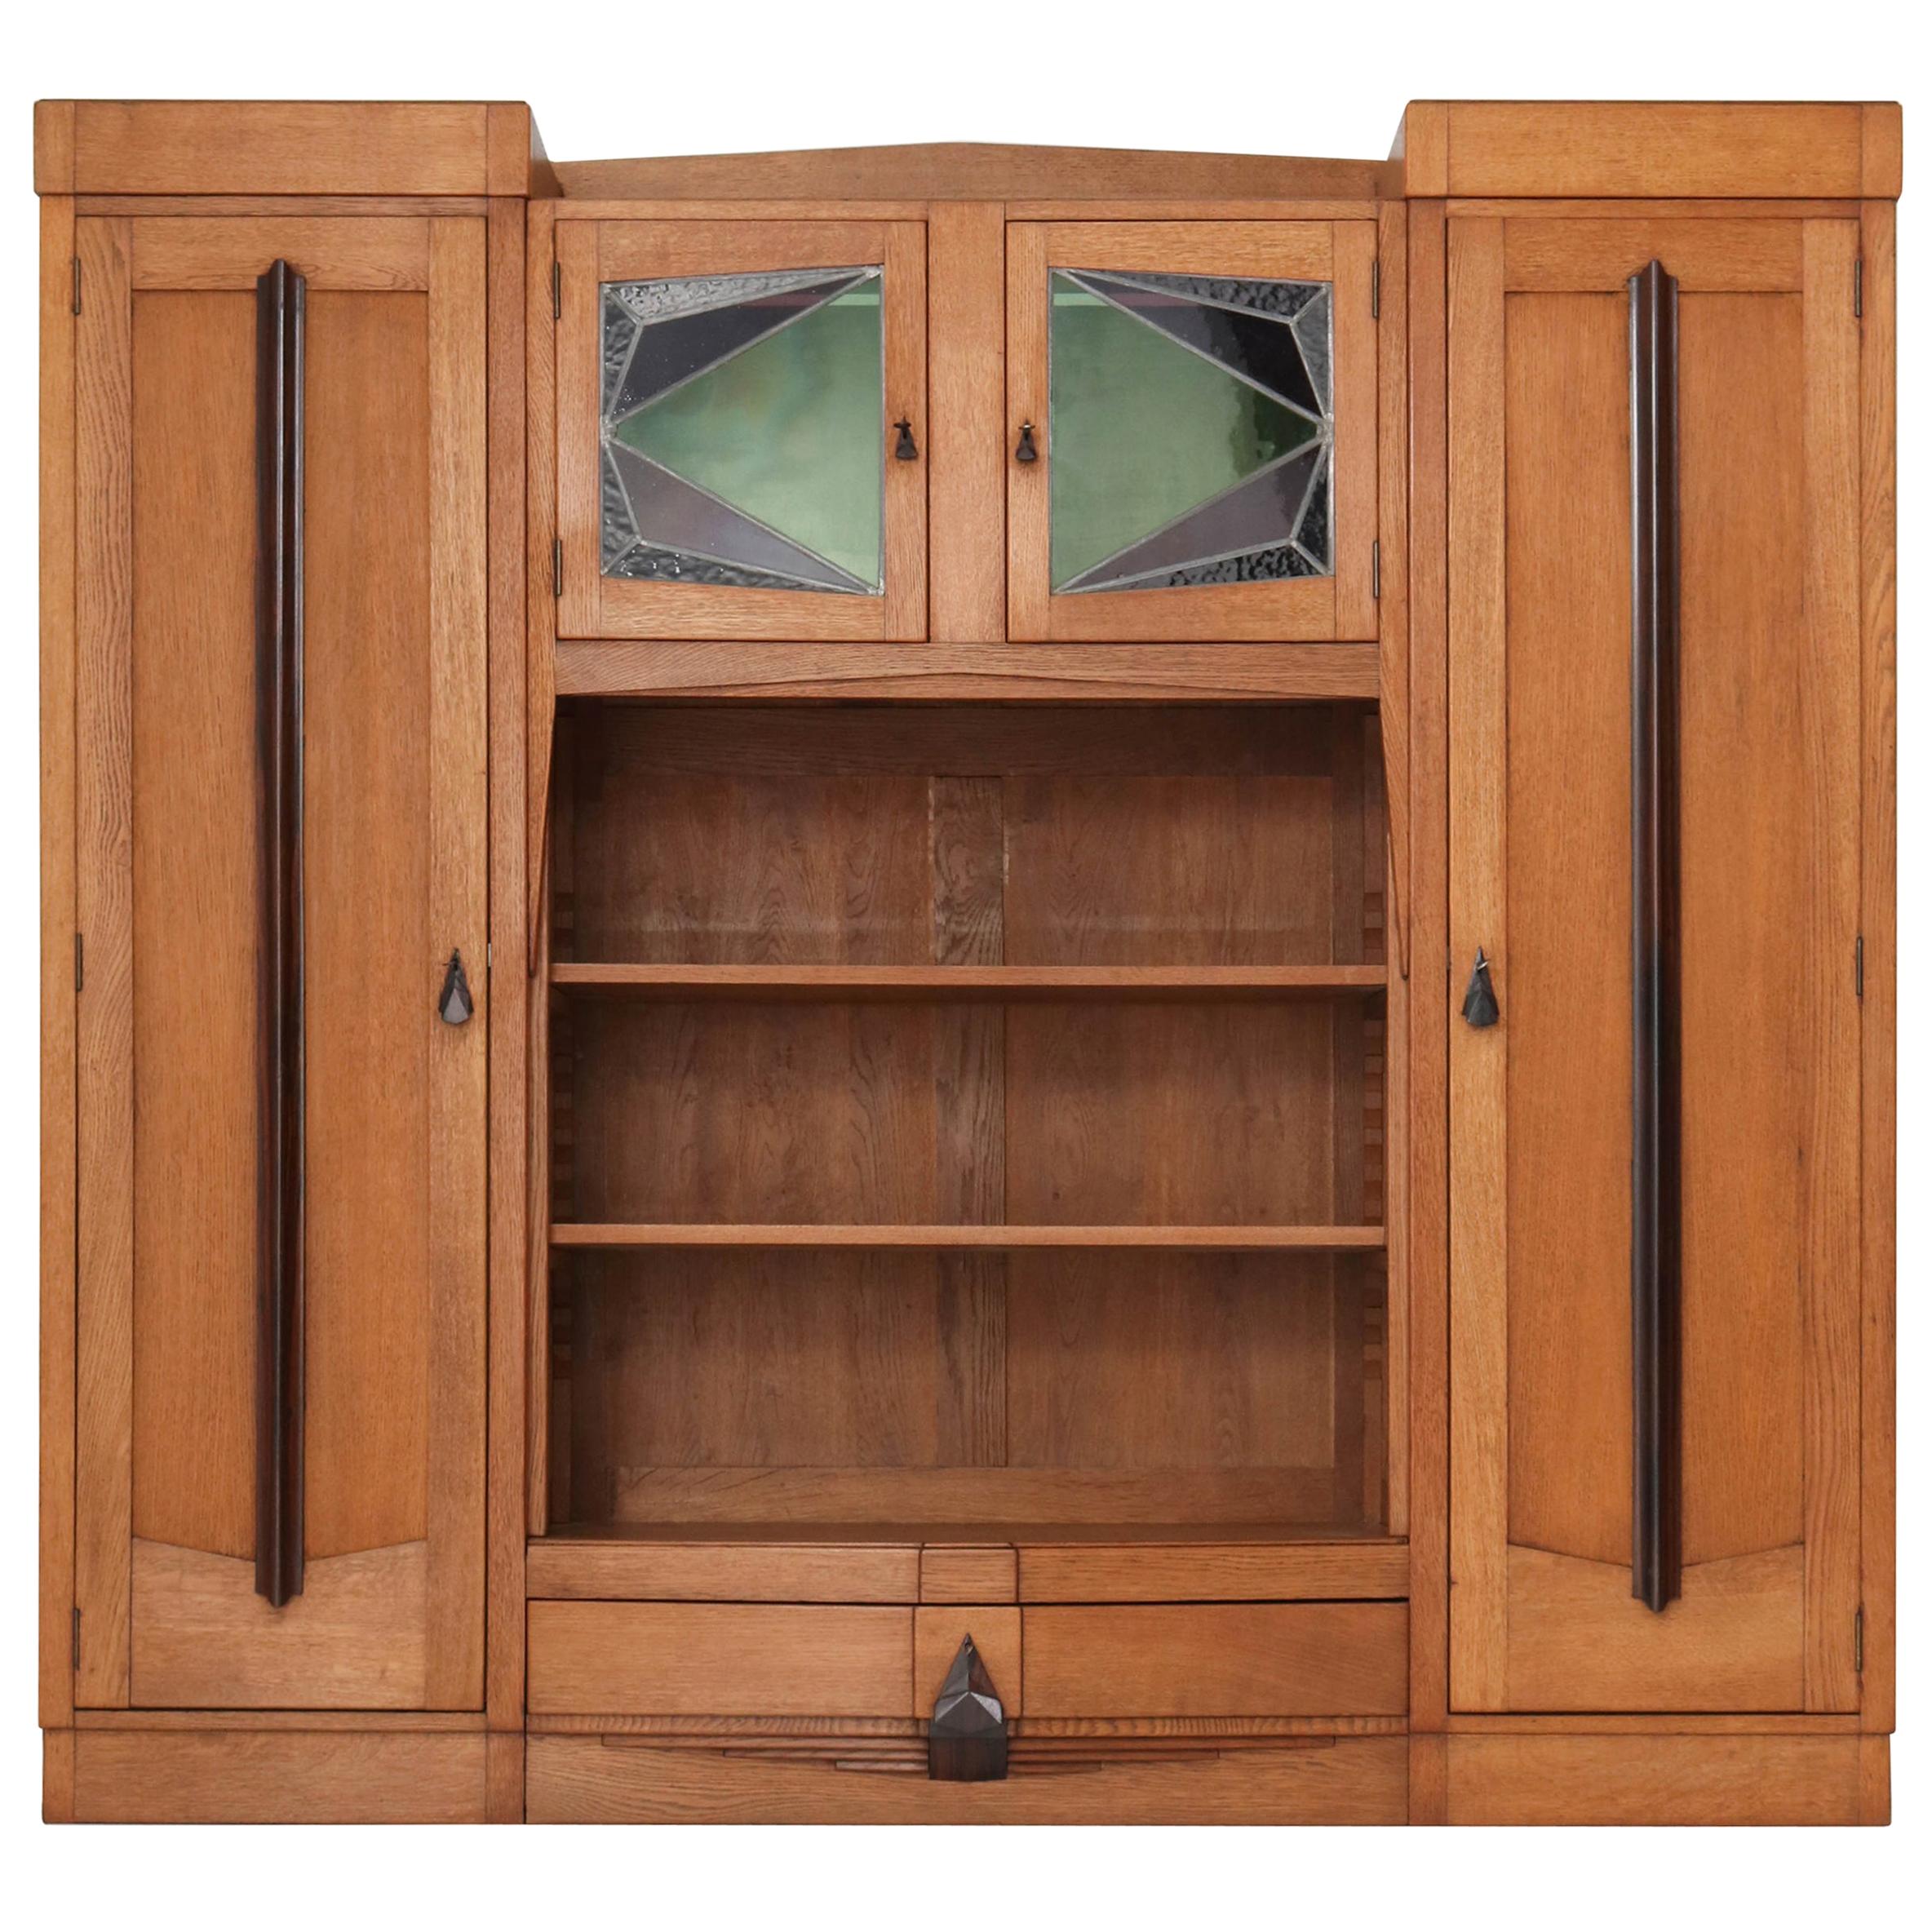 Oak Art Deco Amsterdam School Bookcase with Stained Glass, 1920s